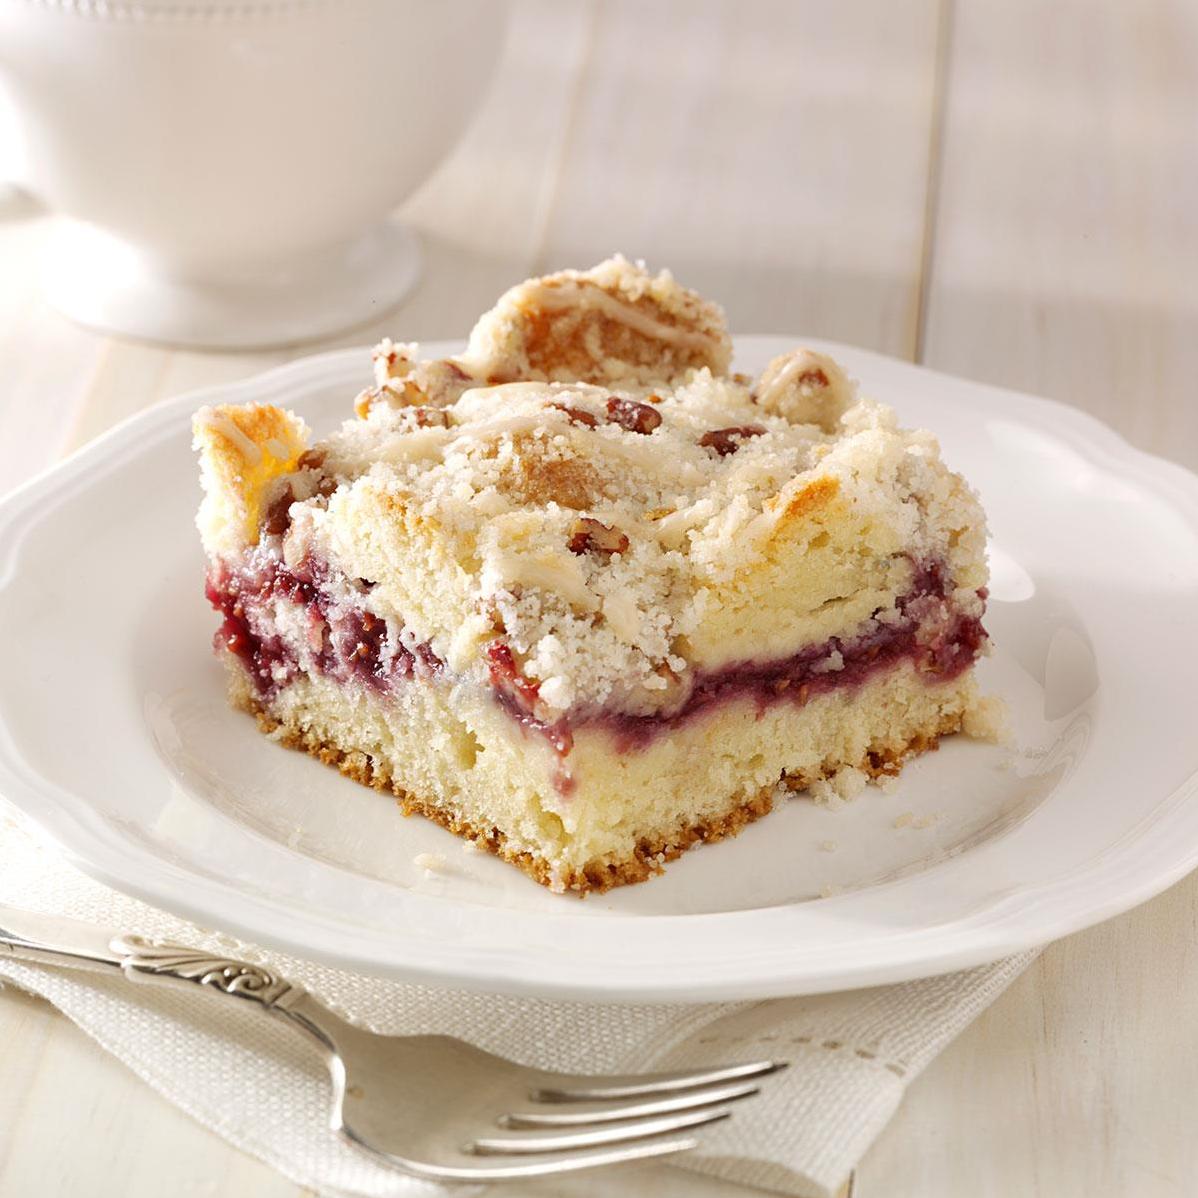  The perfect balance between tangy and sweet, this Raspberry Coffee Cake is sure to please.